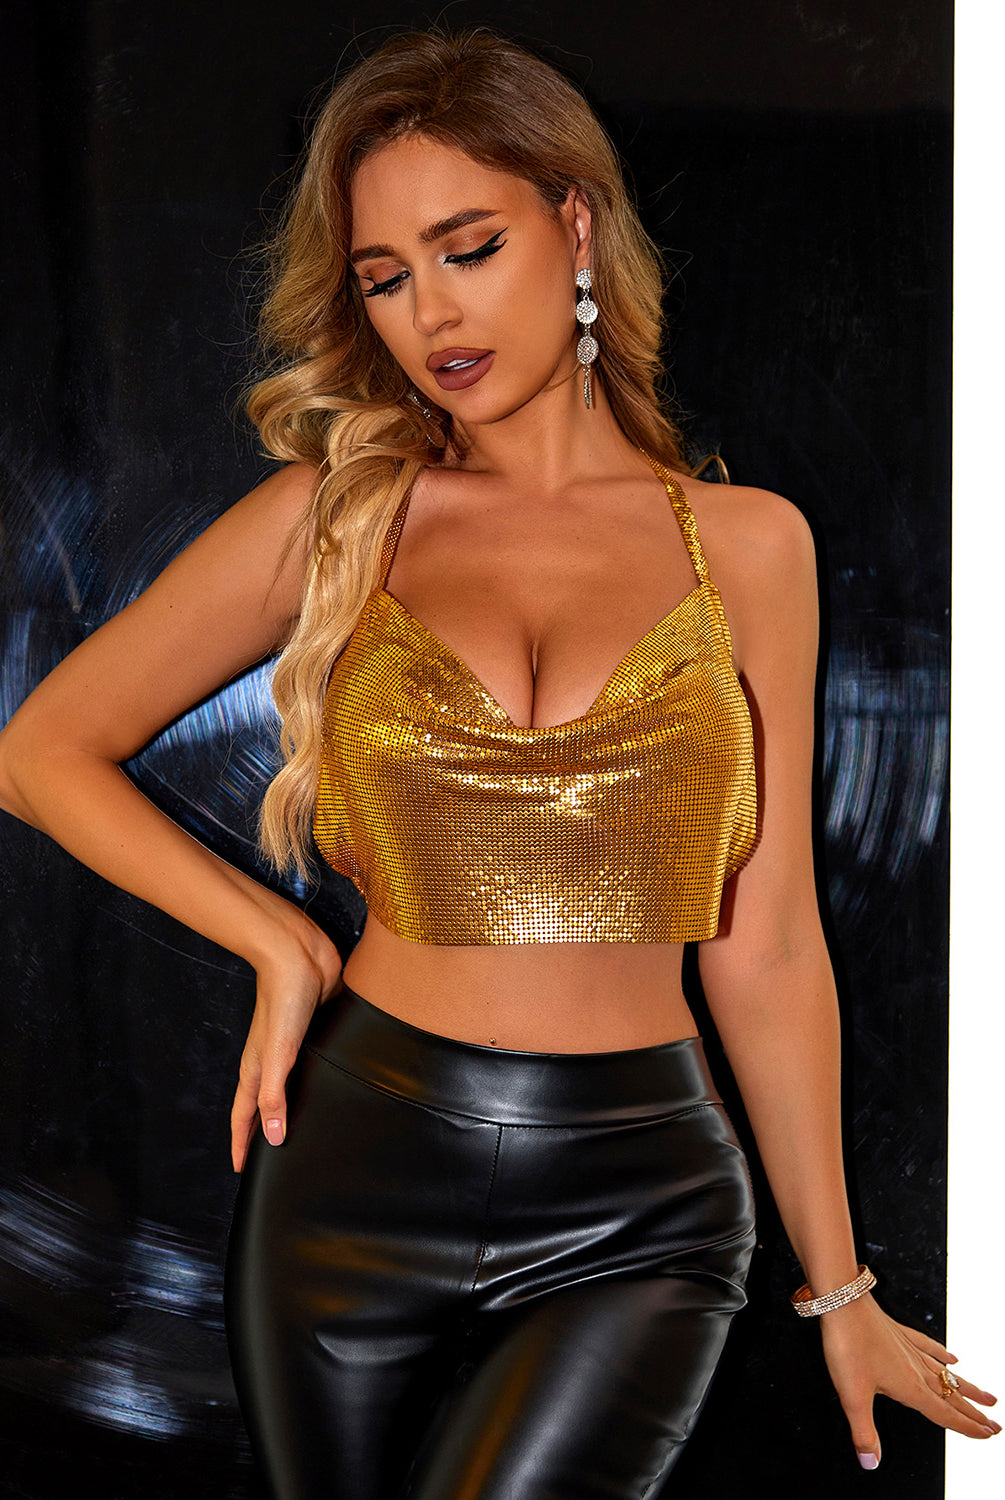 A model poses in a striking gold sequin cami top with a cowl neckline and thin straps, paired with high-waisted black leather pants. The top shimmers with every movement, exuding luxury and glamour, while the model's accessorizing with elegant teardrop earrings and a sparkling bracelet completes the sophisticated look. Her makeup is dramatic and polished, with smoky eyes and a matte lip, and her wavy blonde hair cascades over one shoulder, emphasizing the opulence of the ensemble.